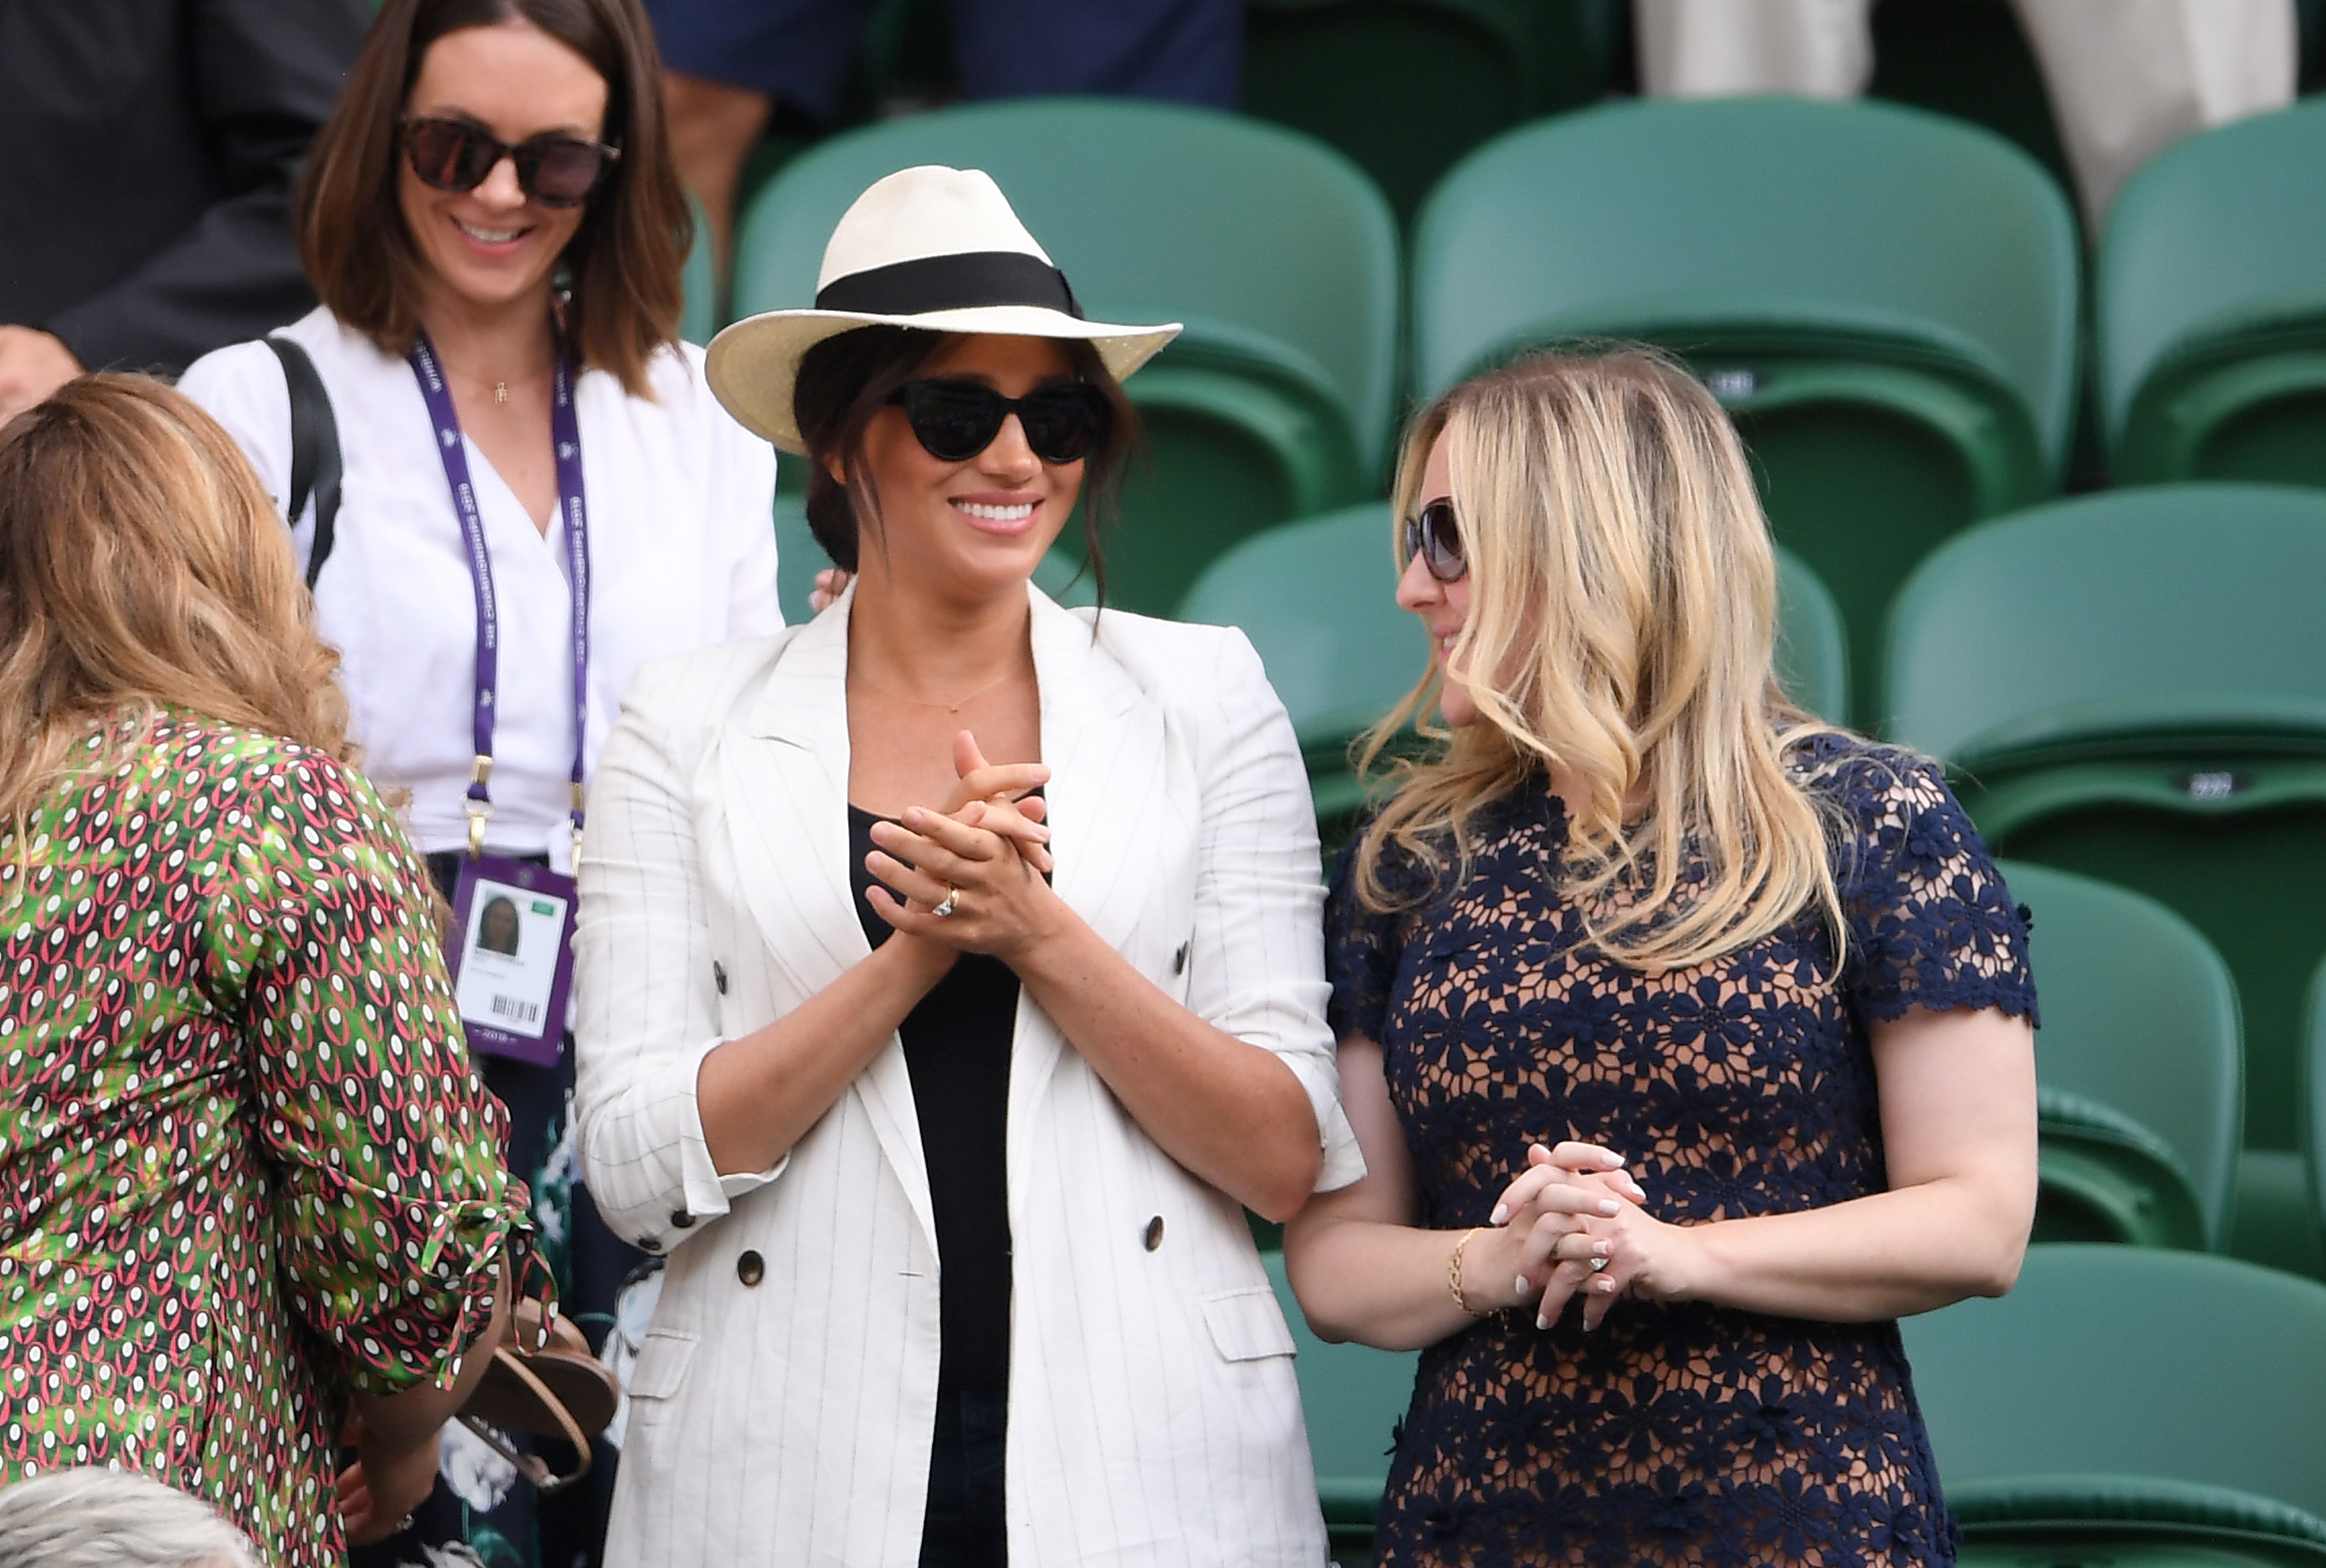  Meghan Markle, Duchess of Sussex watches on during the ladies' Singles Second round match between Serena Williams of The United States and Kaja Juvan of Slovenia during Day four of The Championships - Wimbledon 2019 at All England Lawn Tennis and Croquet Club on July 04, 2019 in London, England. (Photo by Laurence Griffiths/Getty Images)